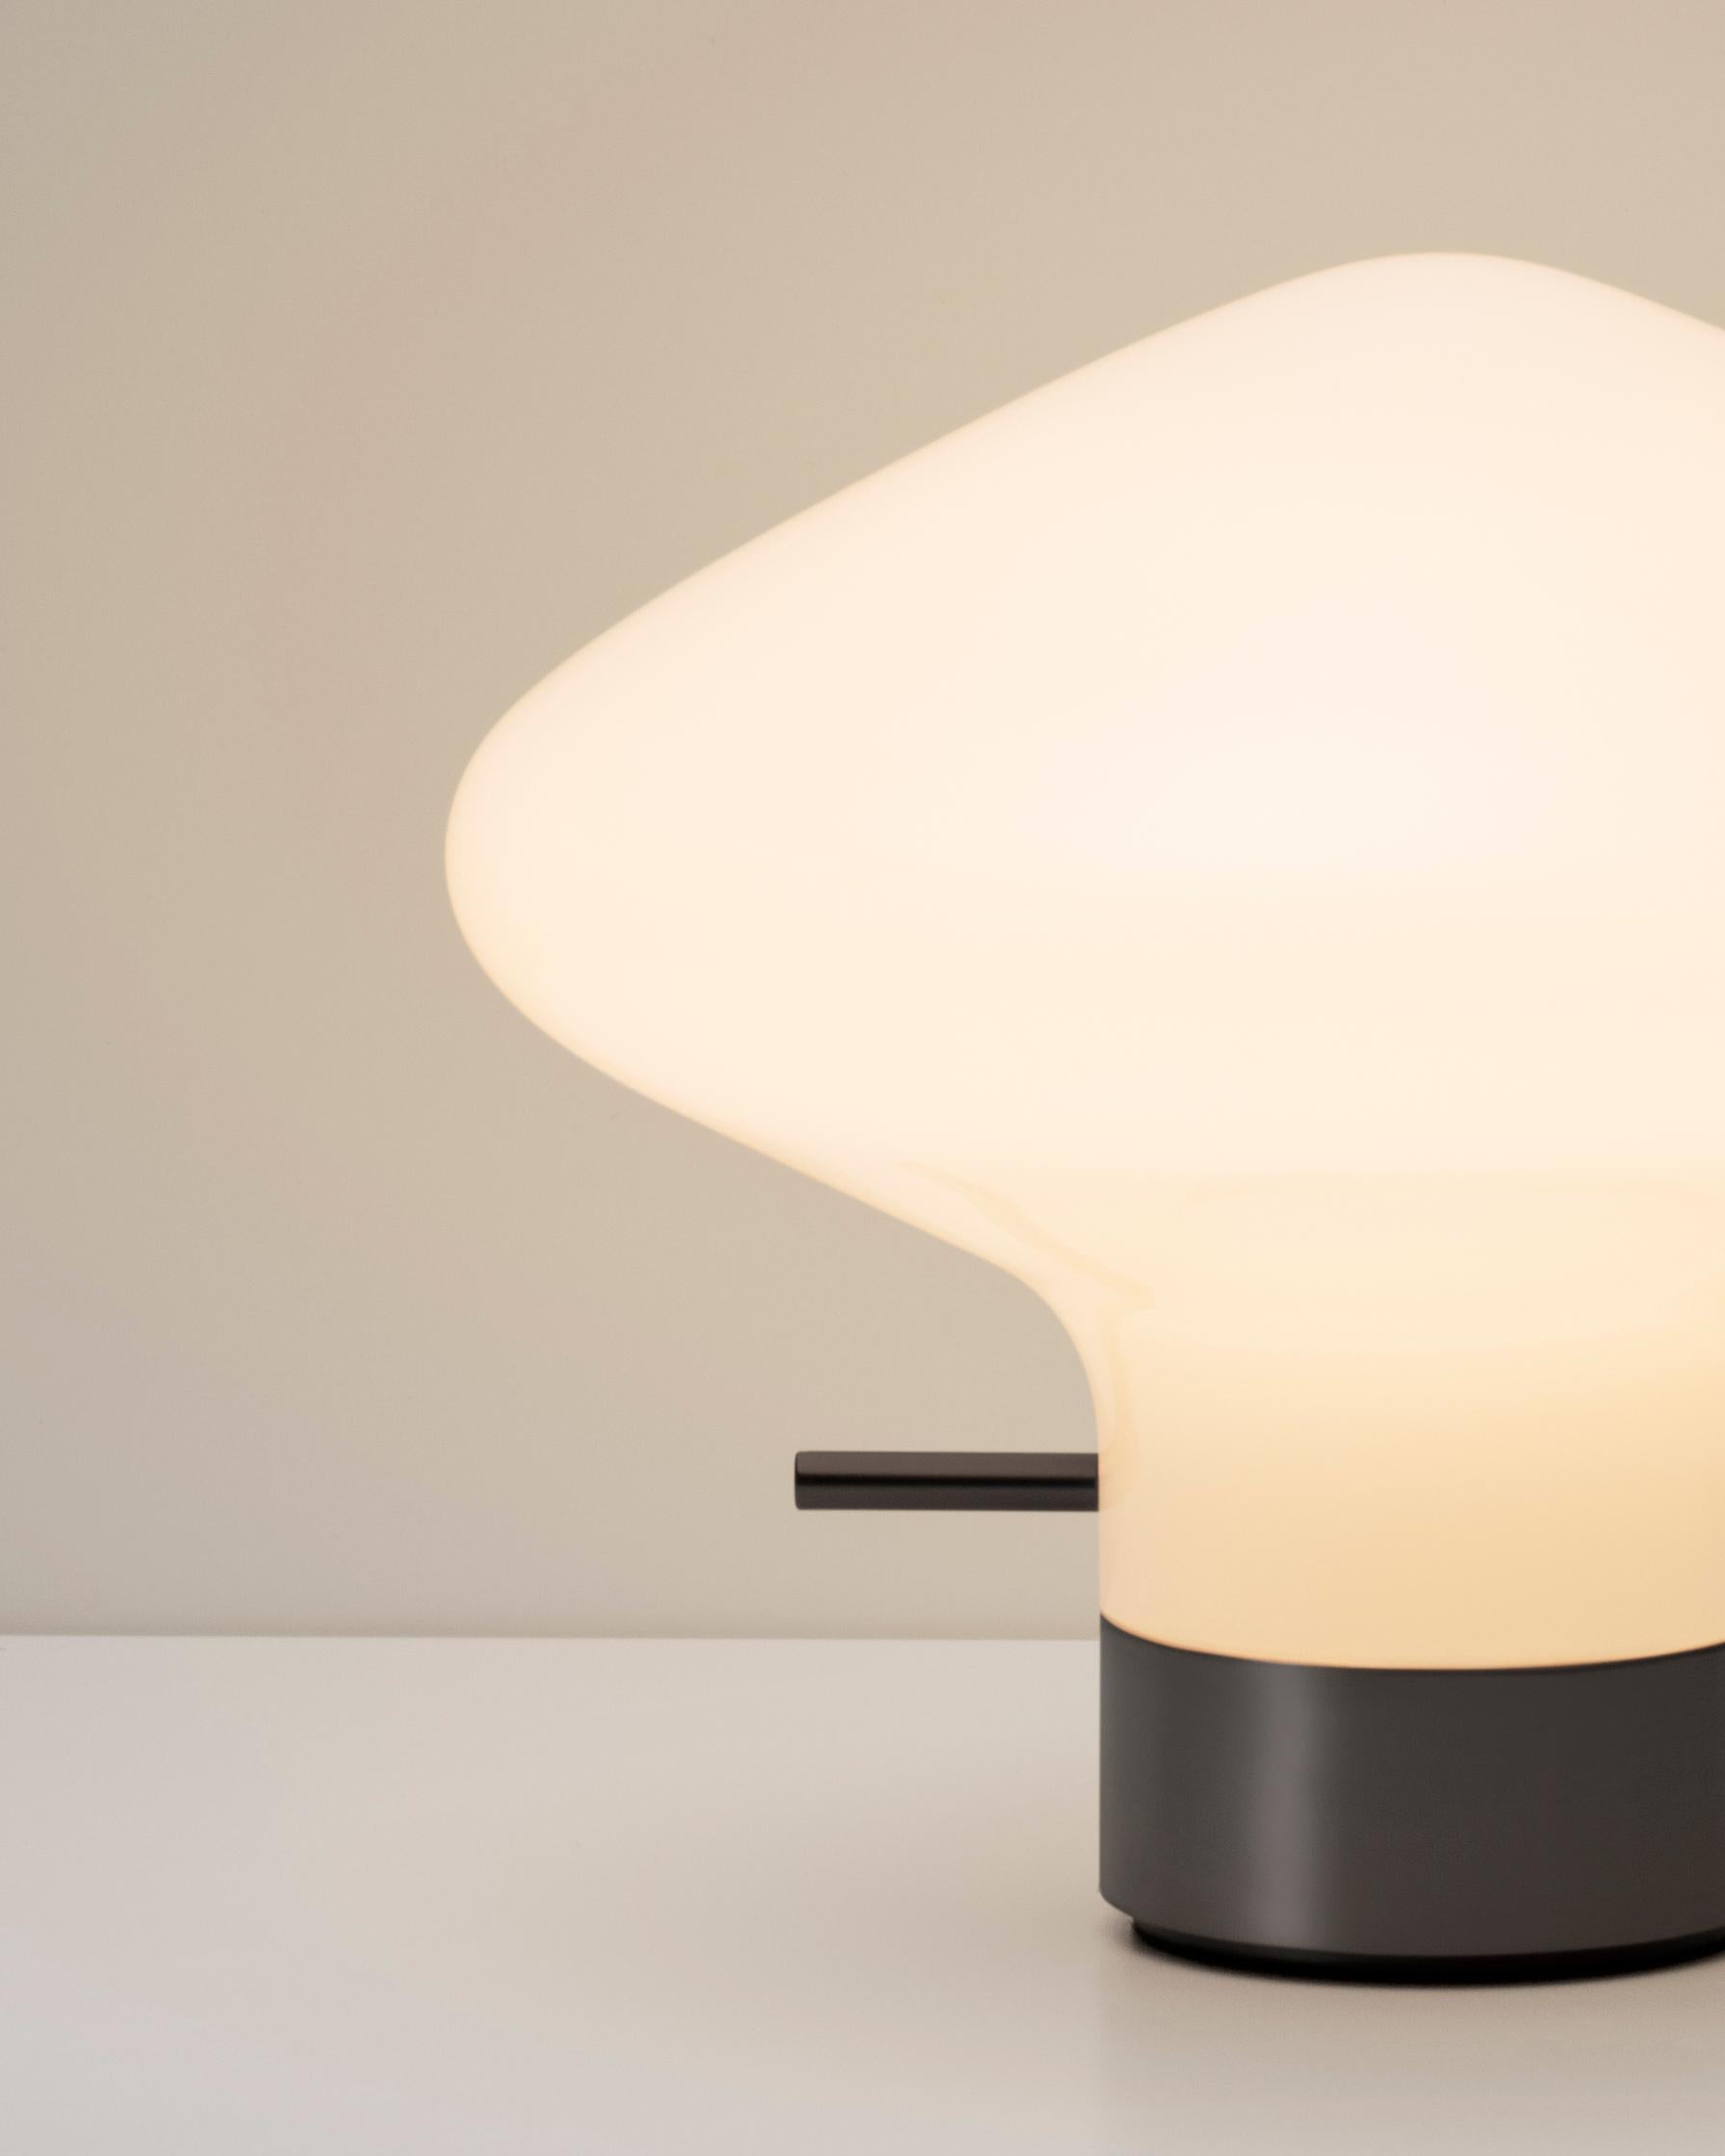 Repose table lamp by GamFratesi for LYFA

Size : H 14.5 cm D 17.5 cm
Materials : Opal glass, brass

Textile wire (black or white) 250cm
Light source: G9 max 60 W (110V-230V)

--
GamFratesi has designed the Repose series with simplicity in